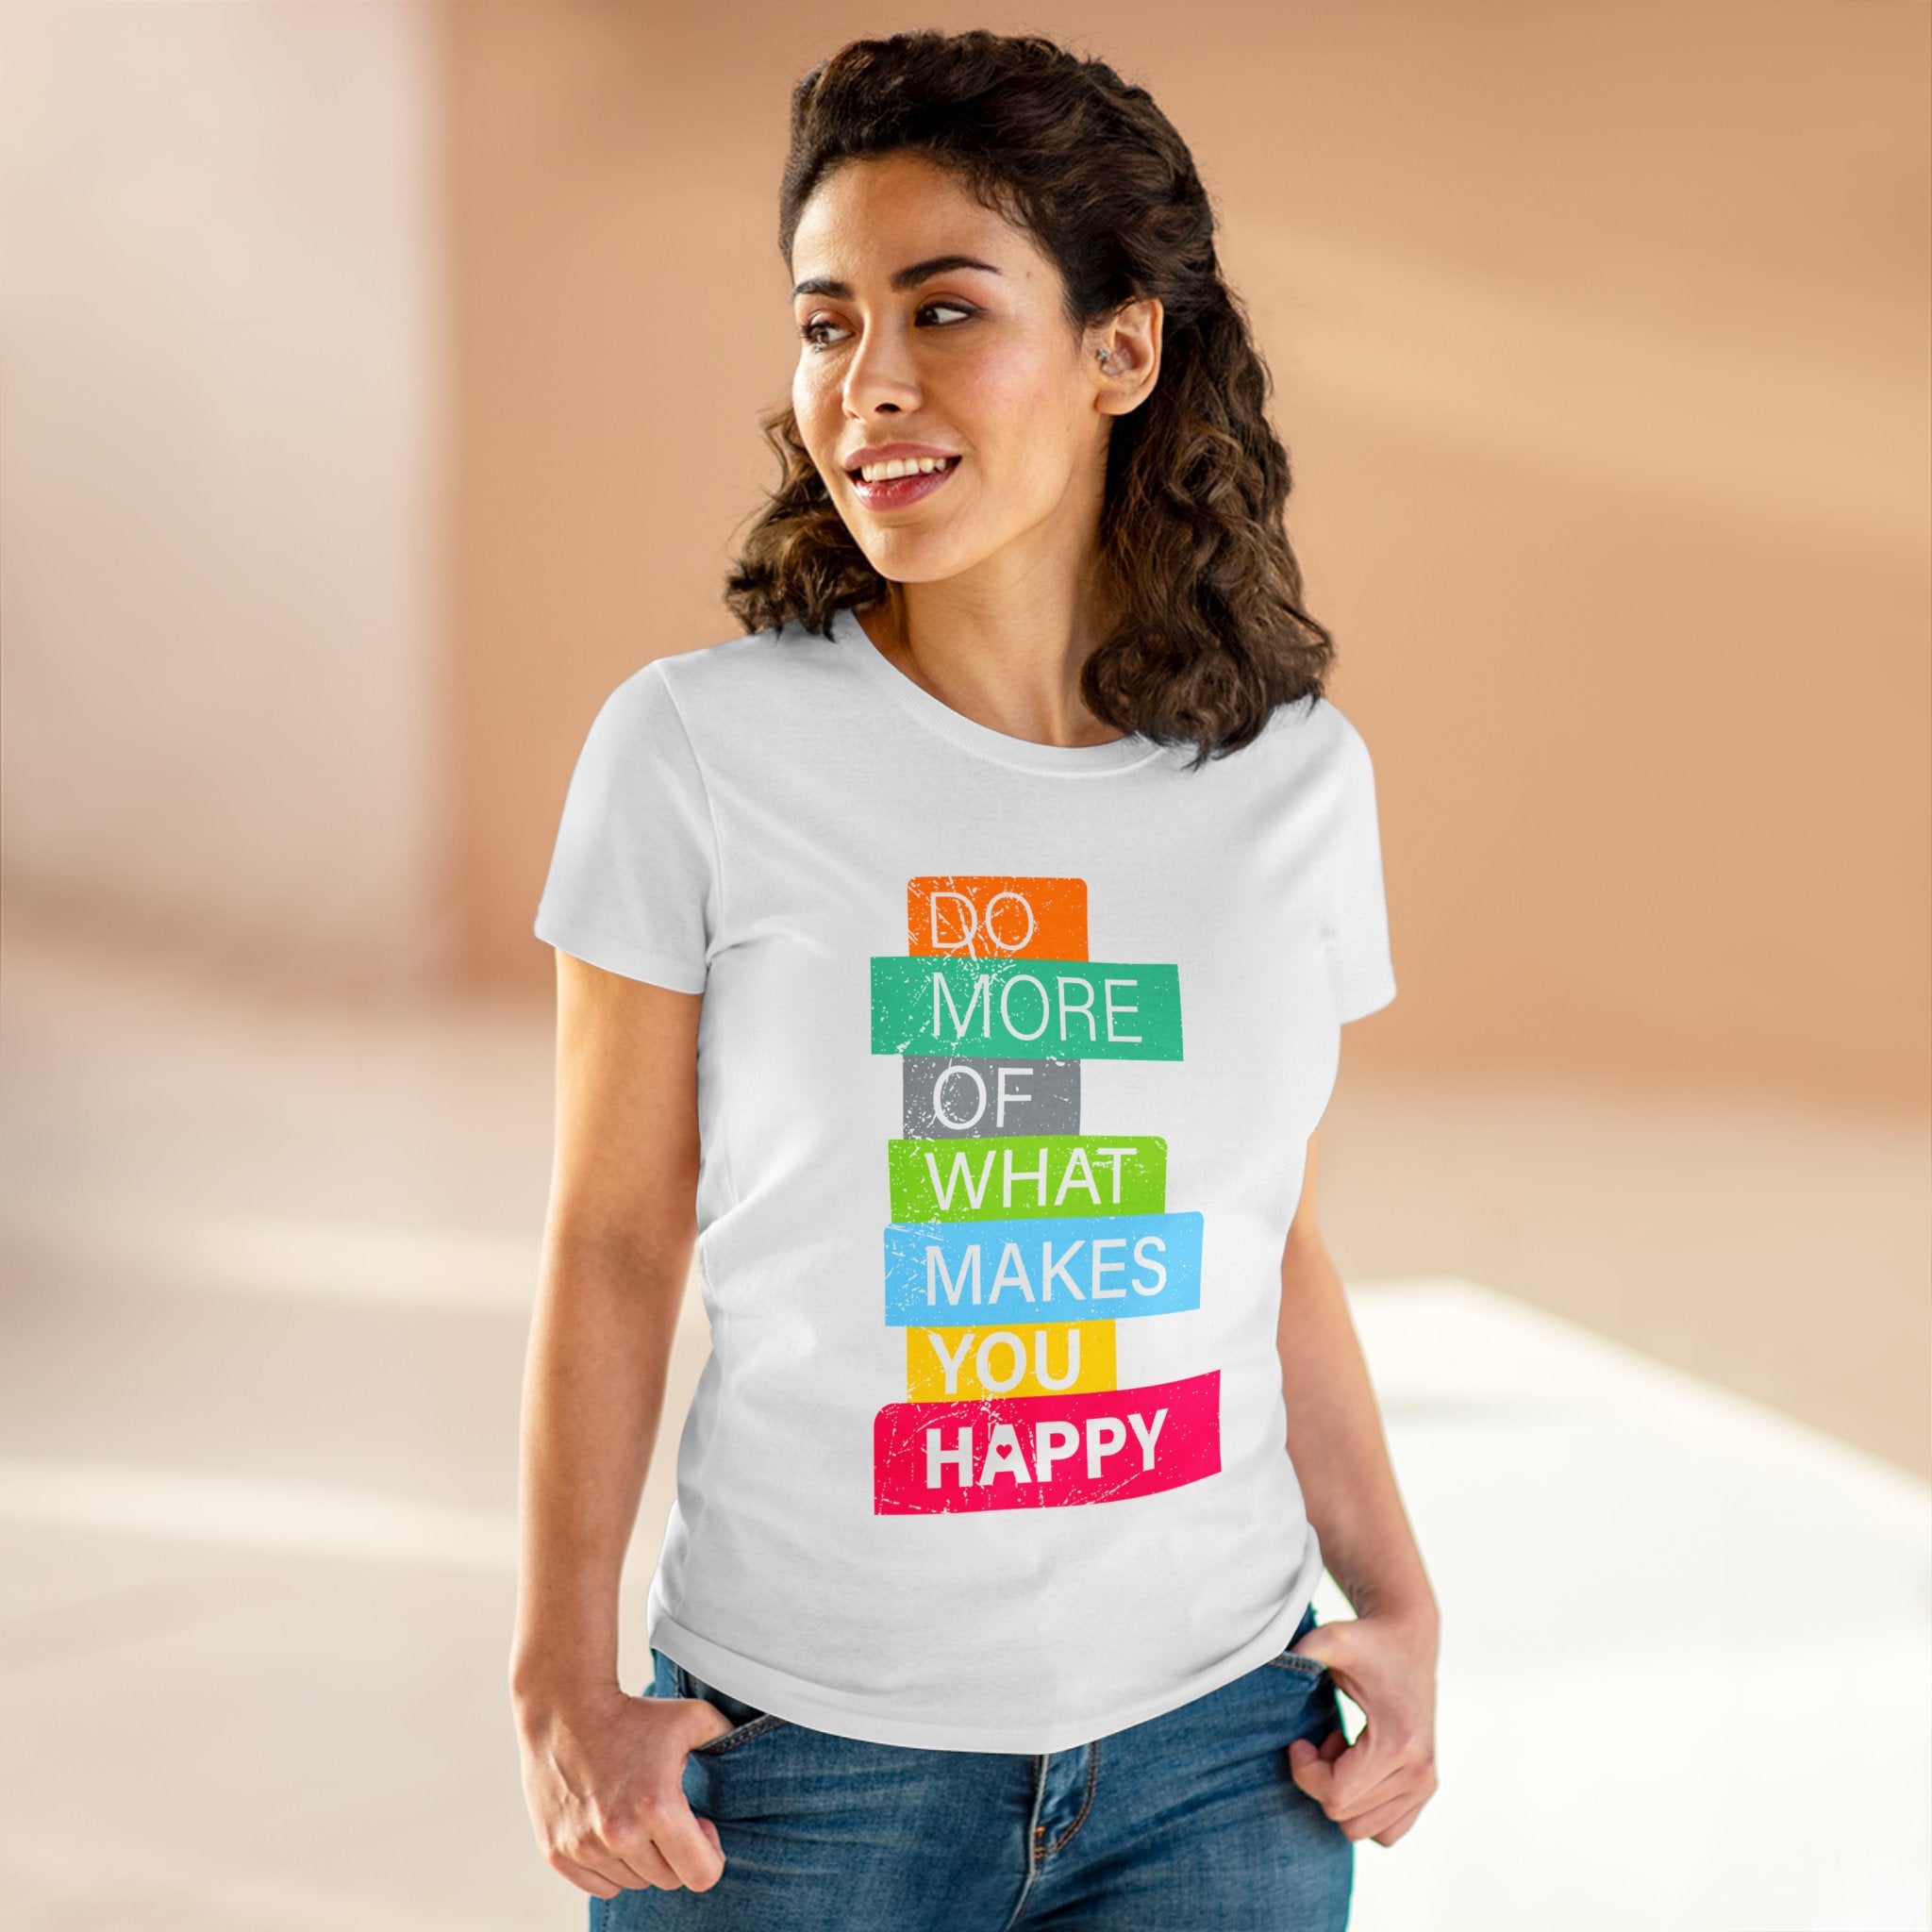 Do More of What Makes You Happy - Women'sTee